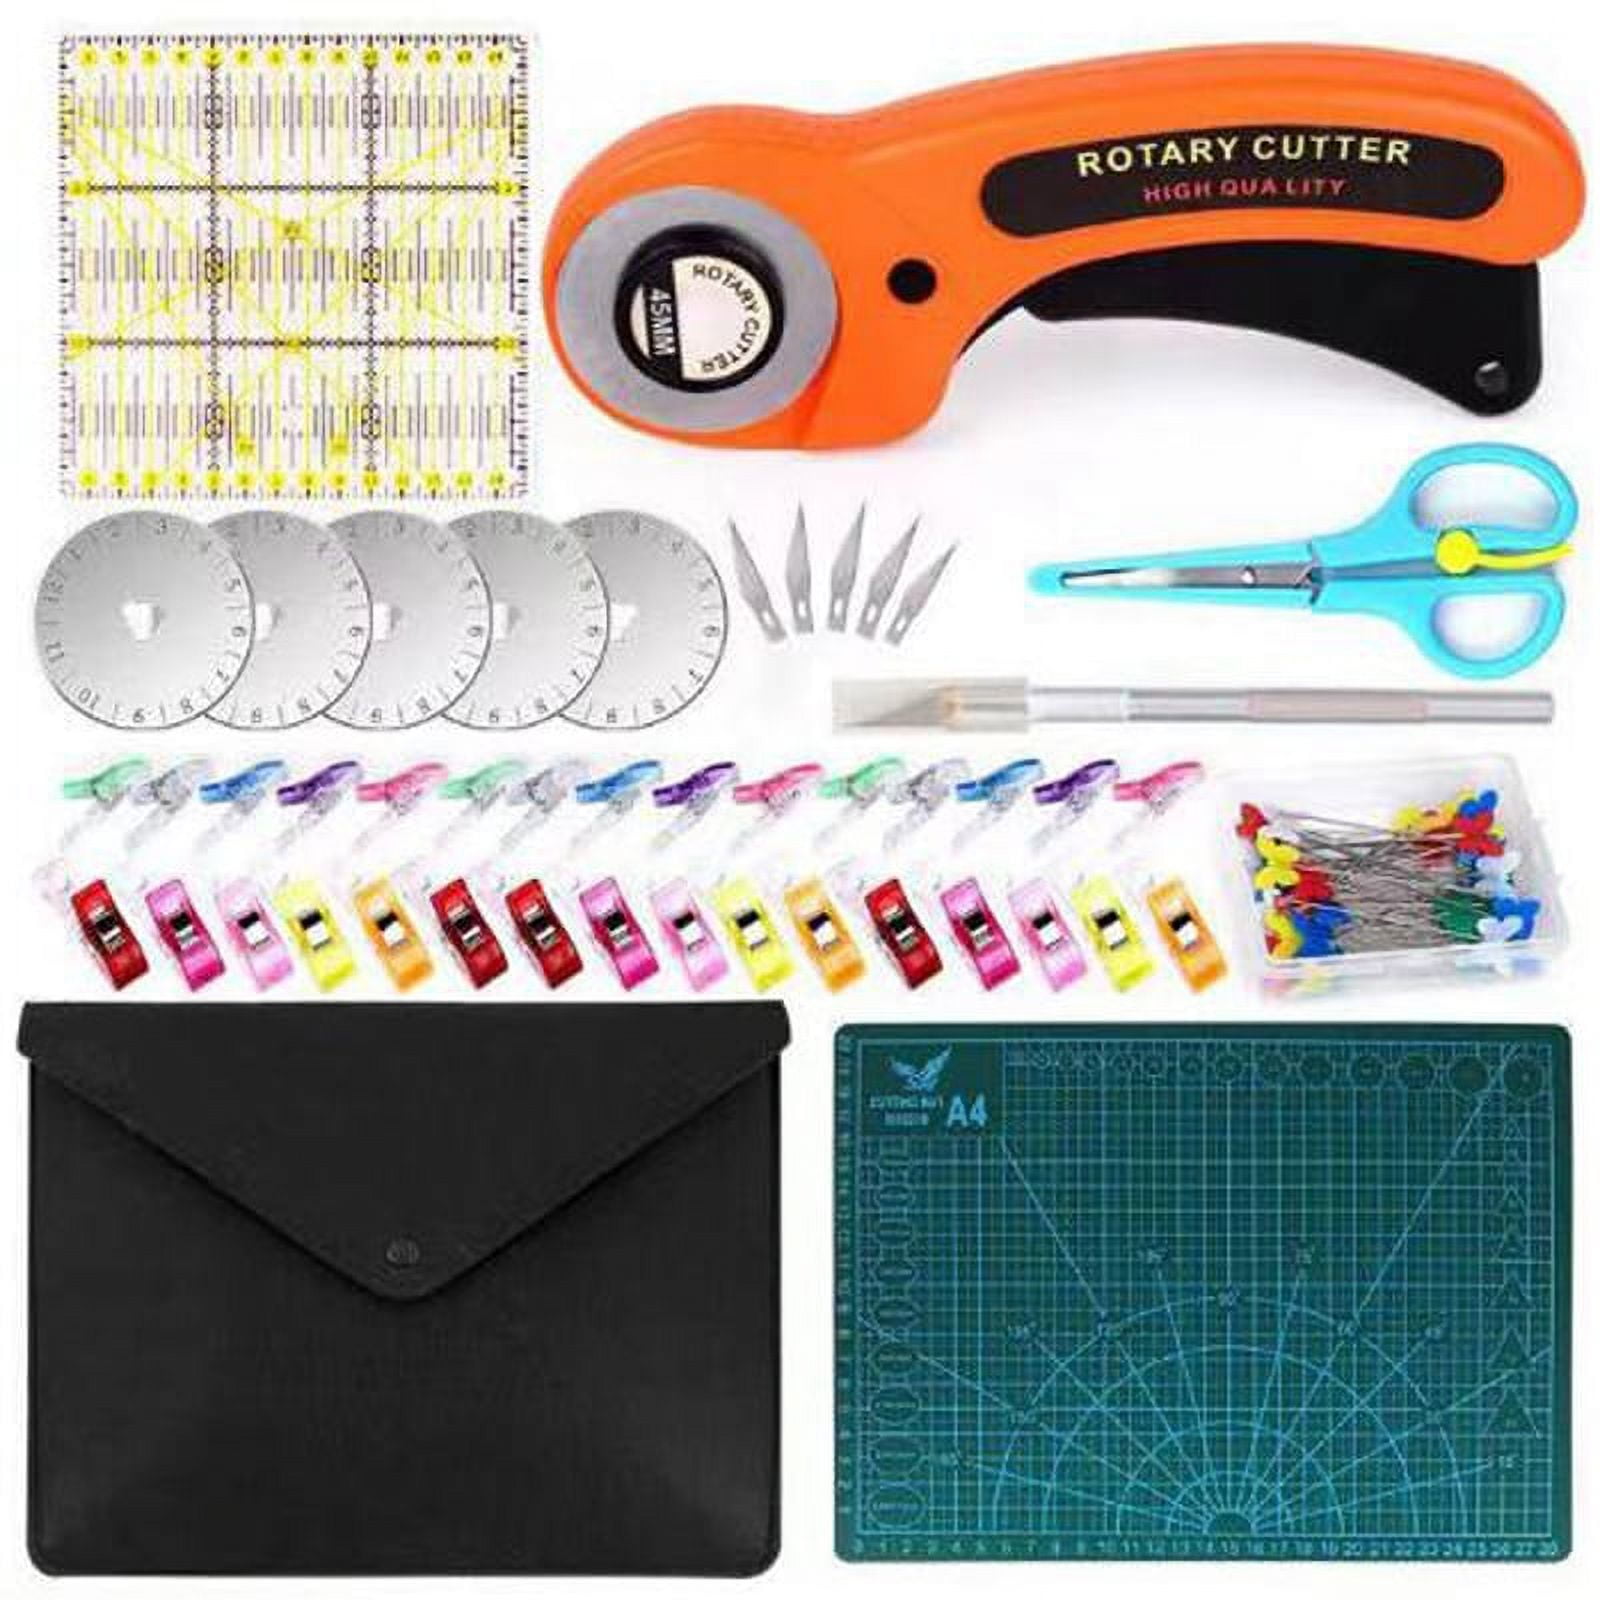 Headley Tools Rotary Cutter Set - 45mm Fabric Cutter, 5 Extra Rotary  Blades, A3 Cutting Mat, Quilting Ruler and Sewing Clips, Craft Knife Set,  Ideal